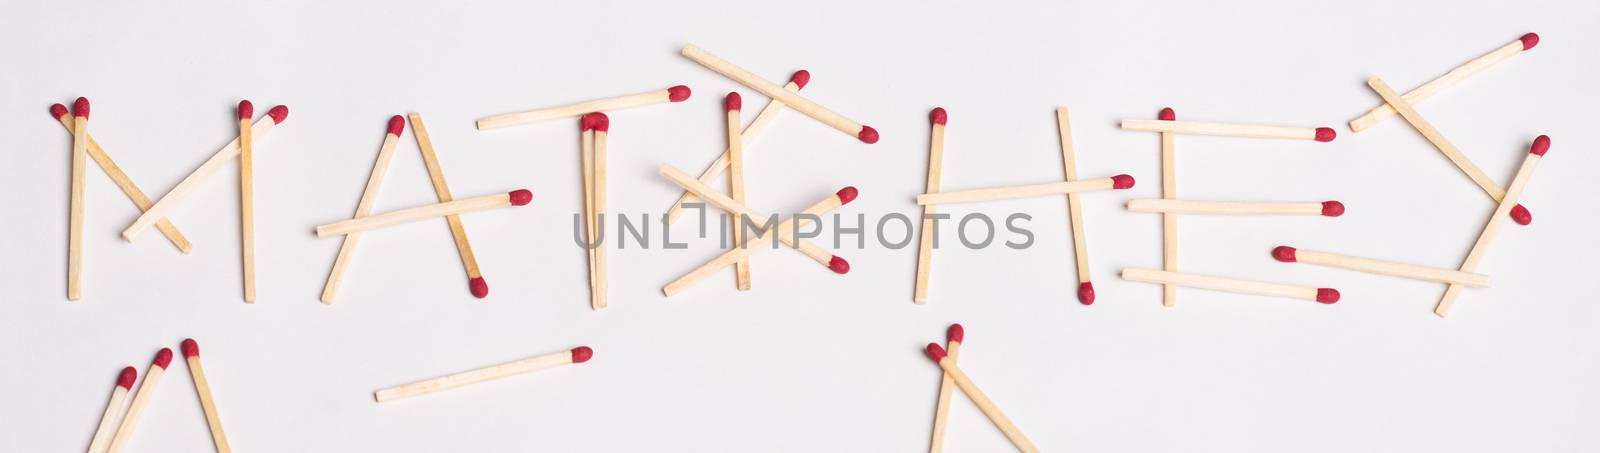 Matches by viscorp